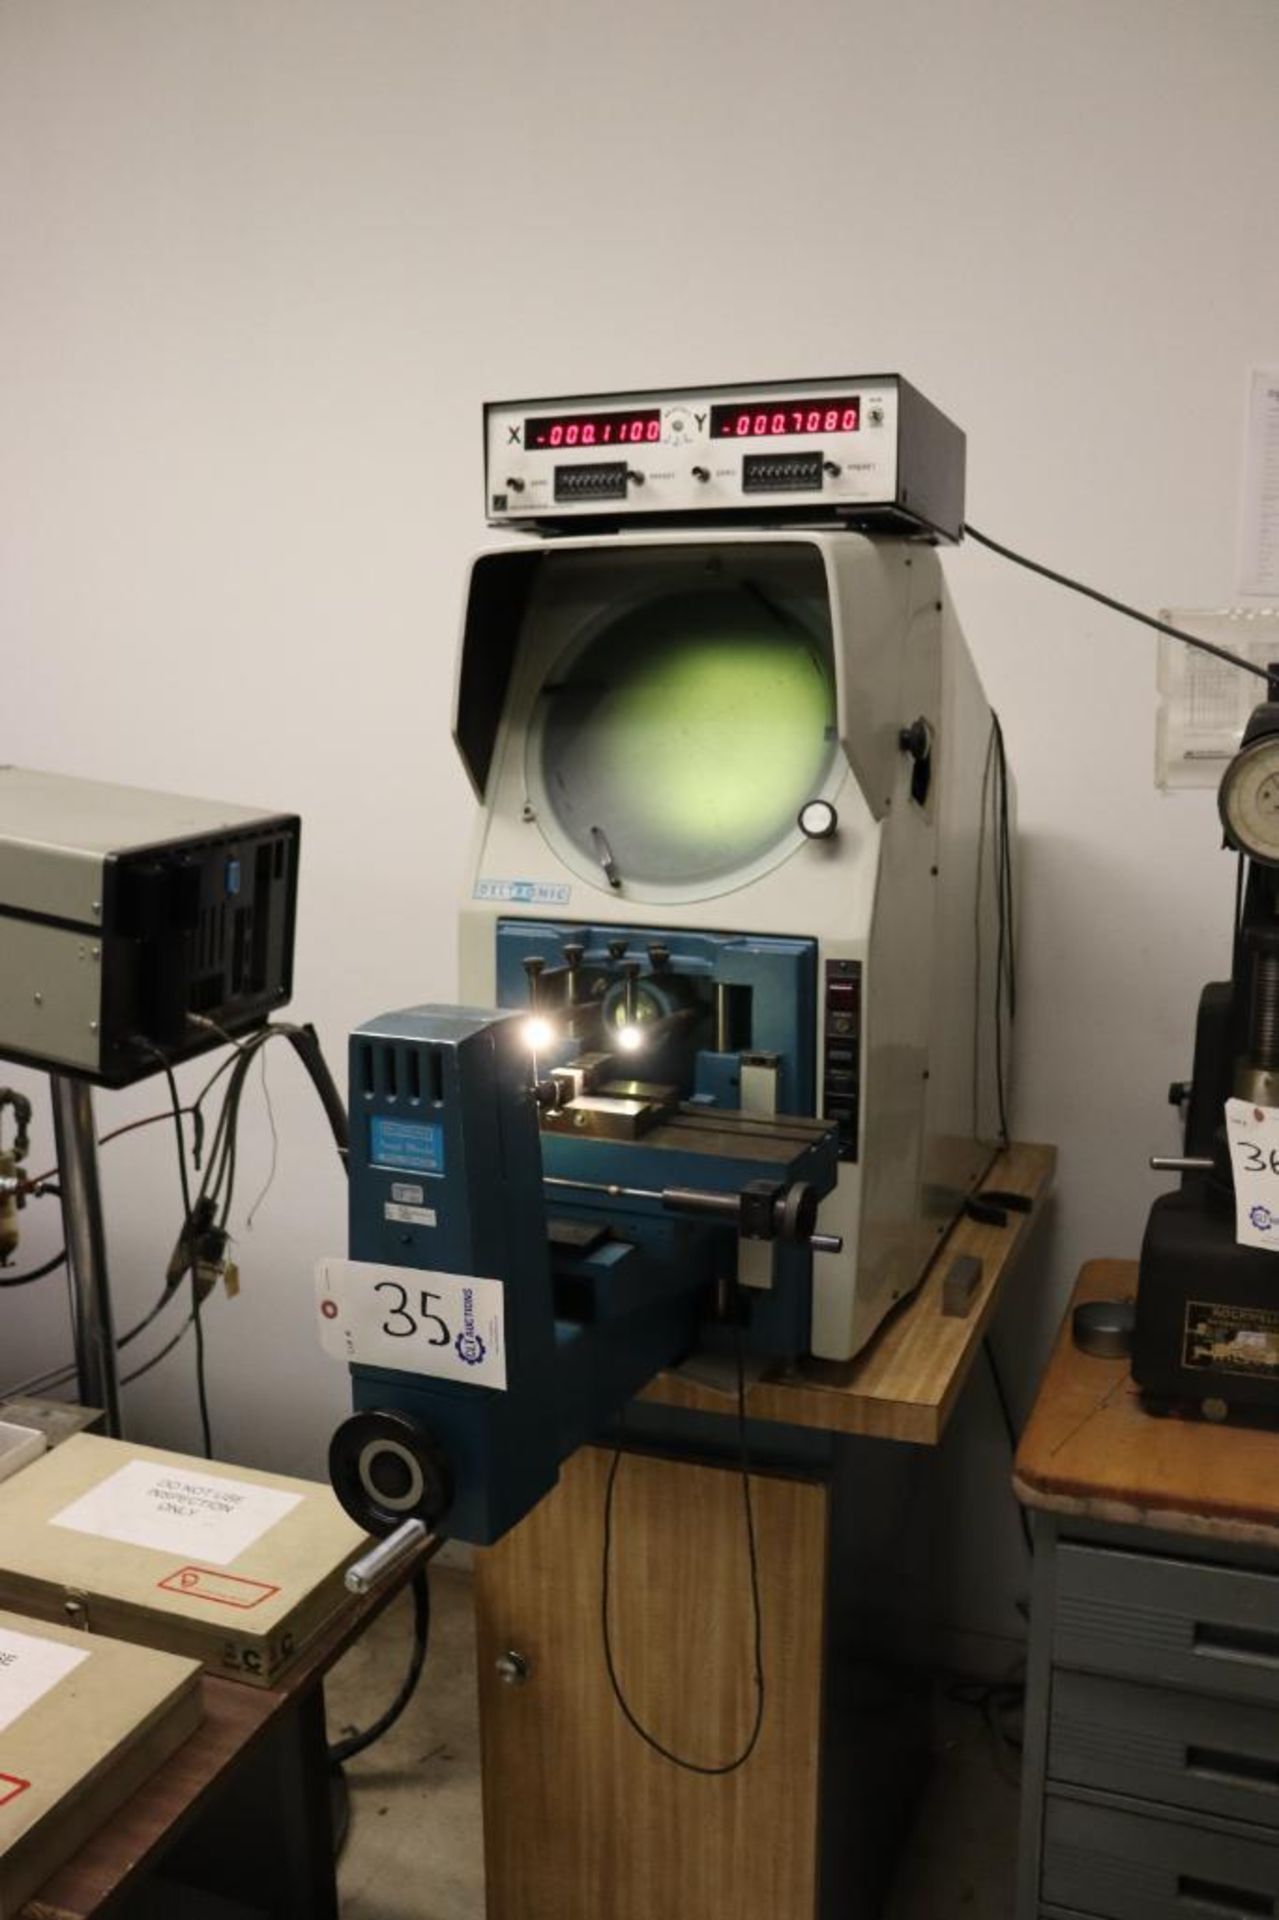 Deltronic DH-14 optical comparator